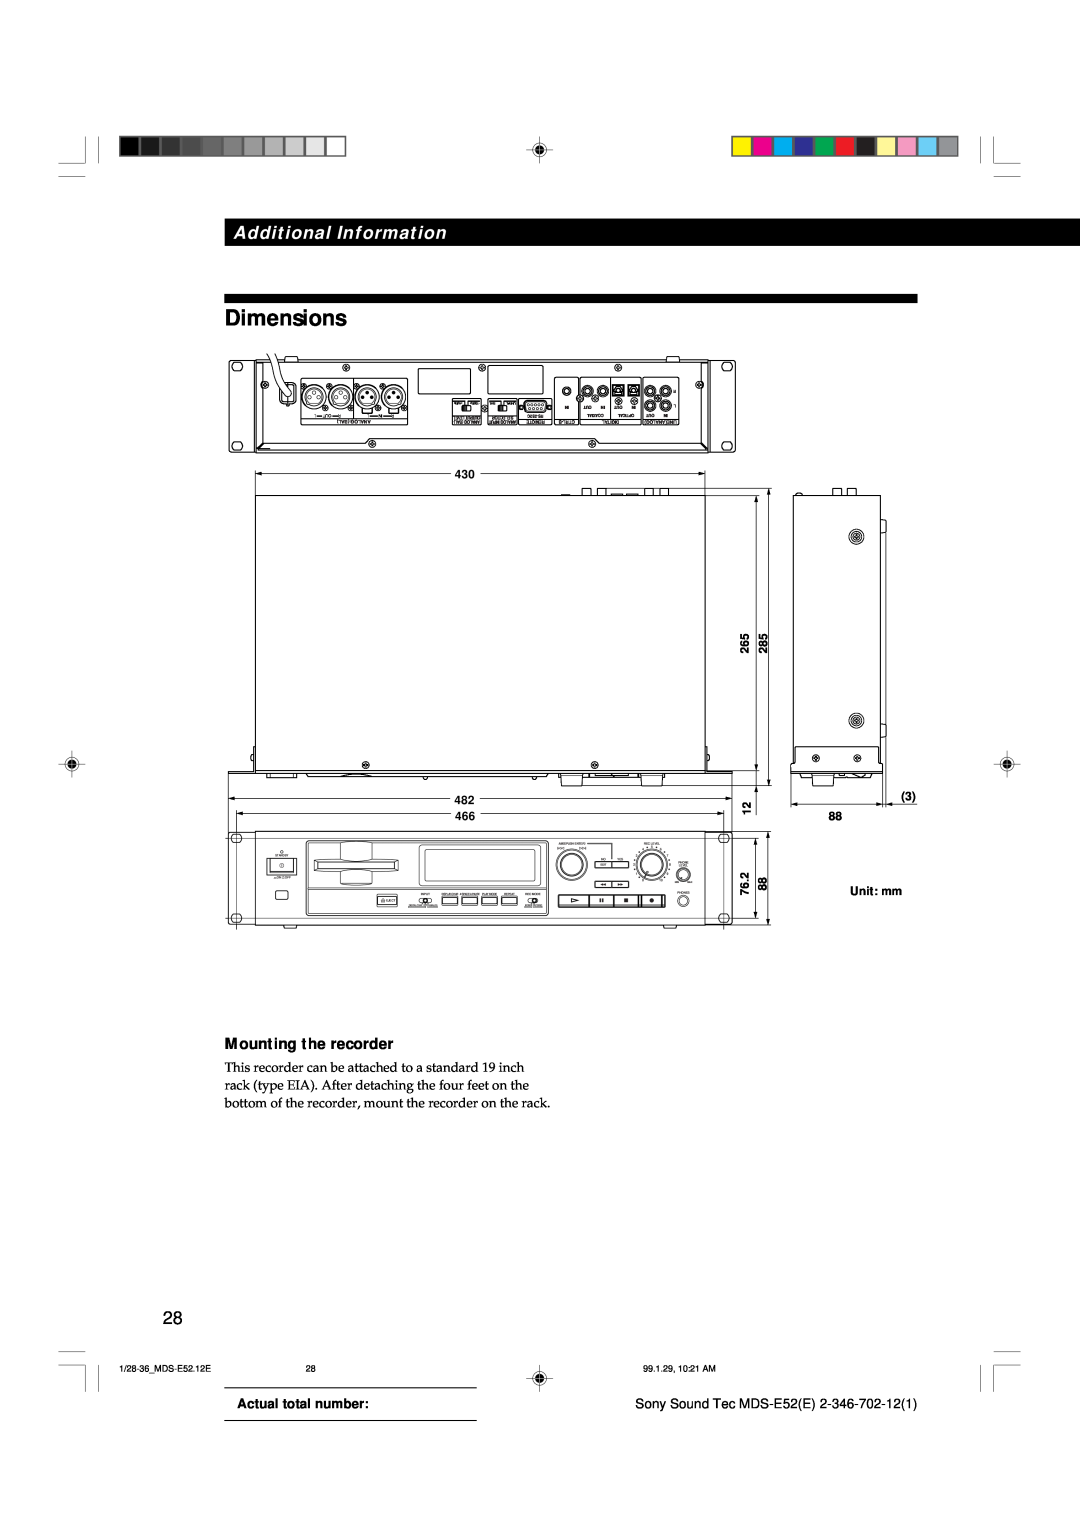 Sony manual Dimensions, Mounting the recorder, Additional Information, Actual total number, Sony Sound Tec MDS-E52E 